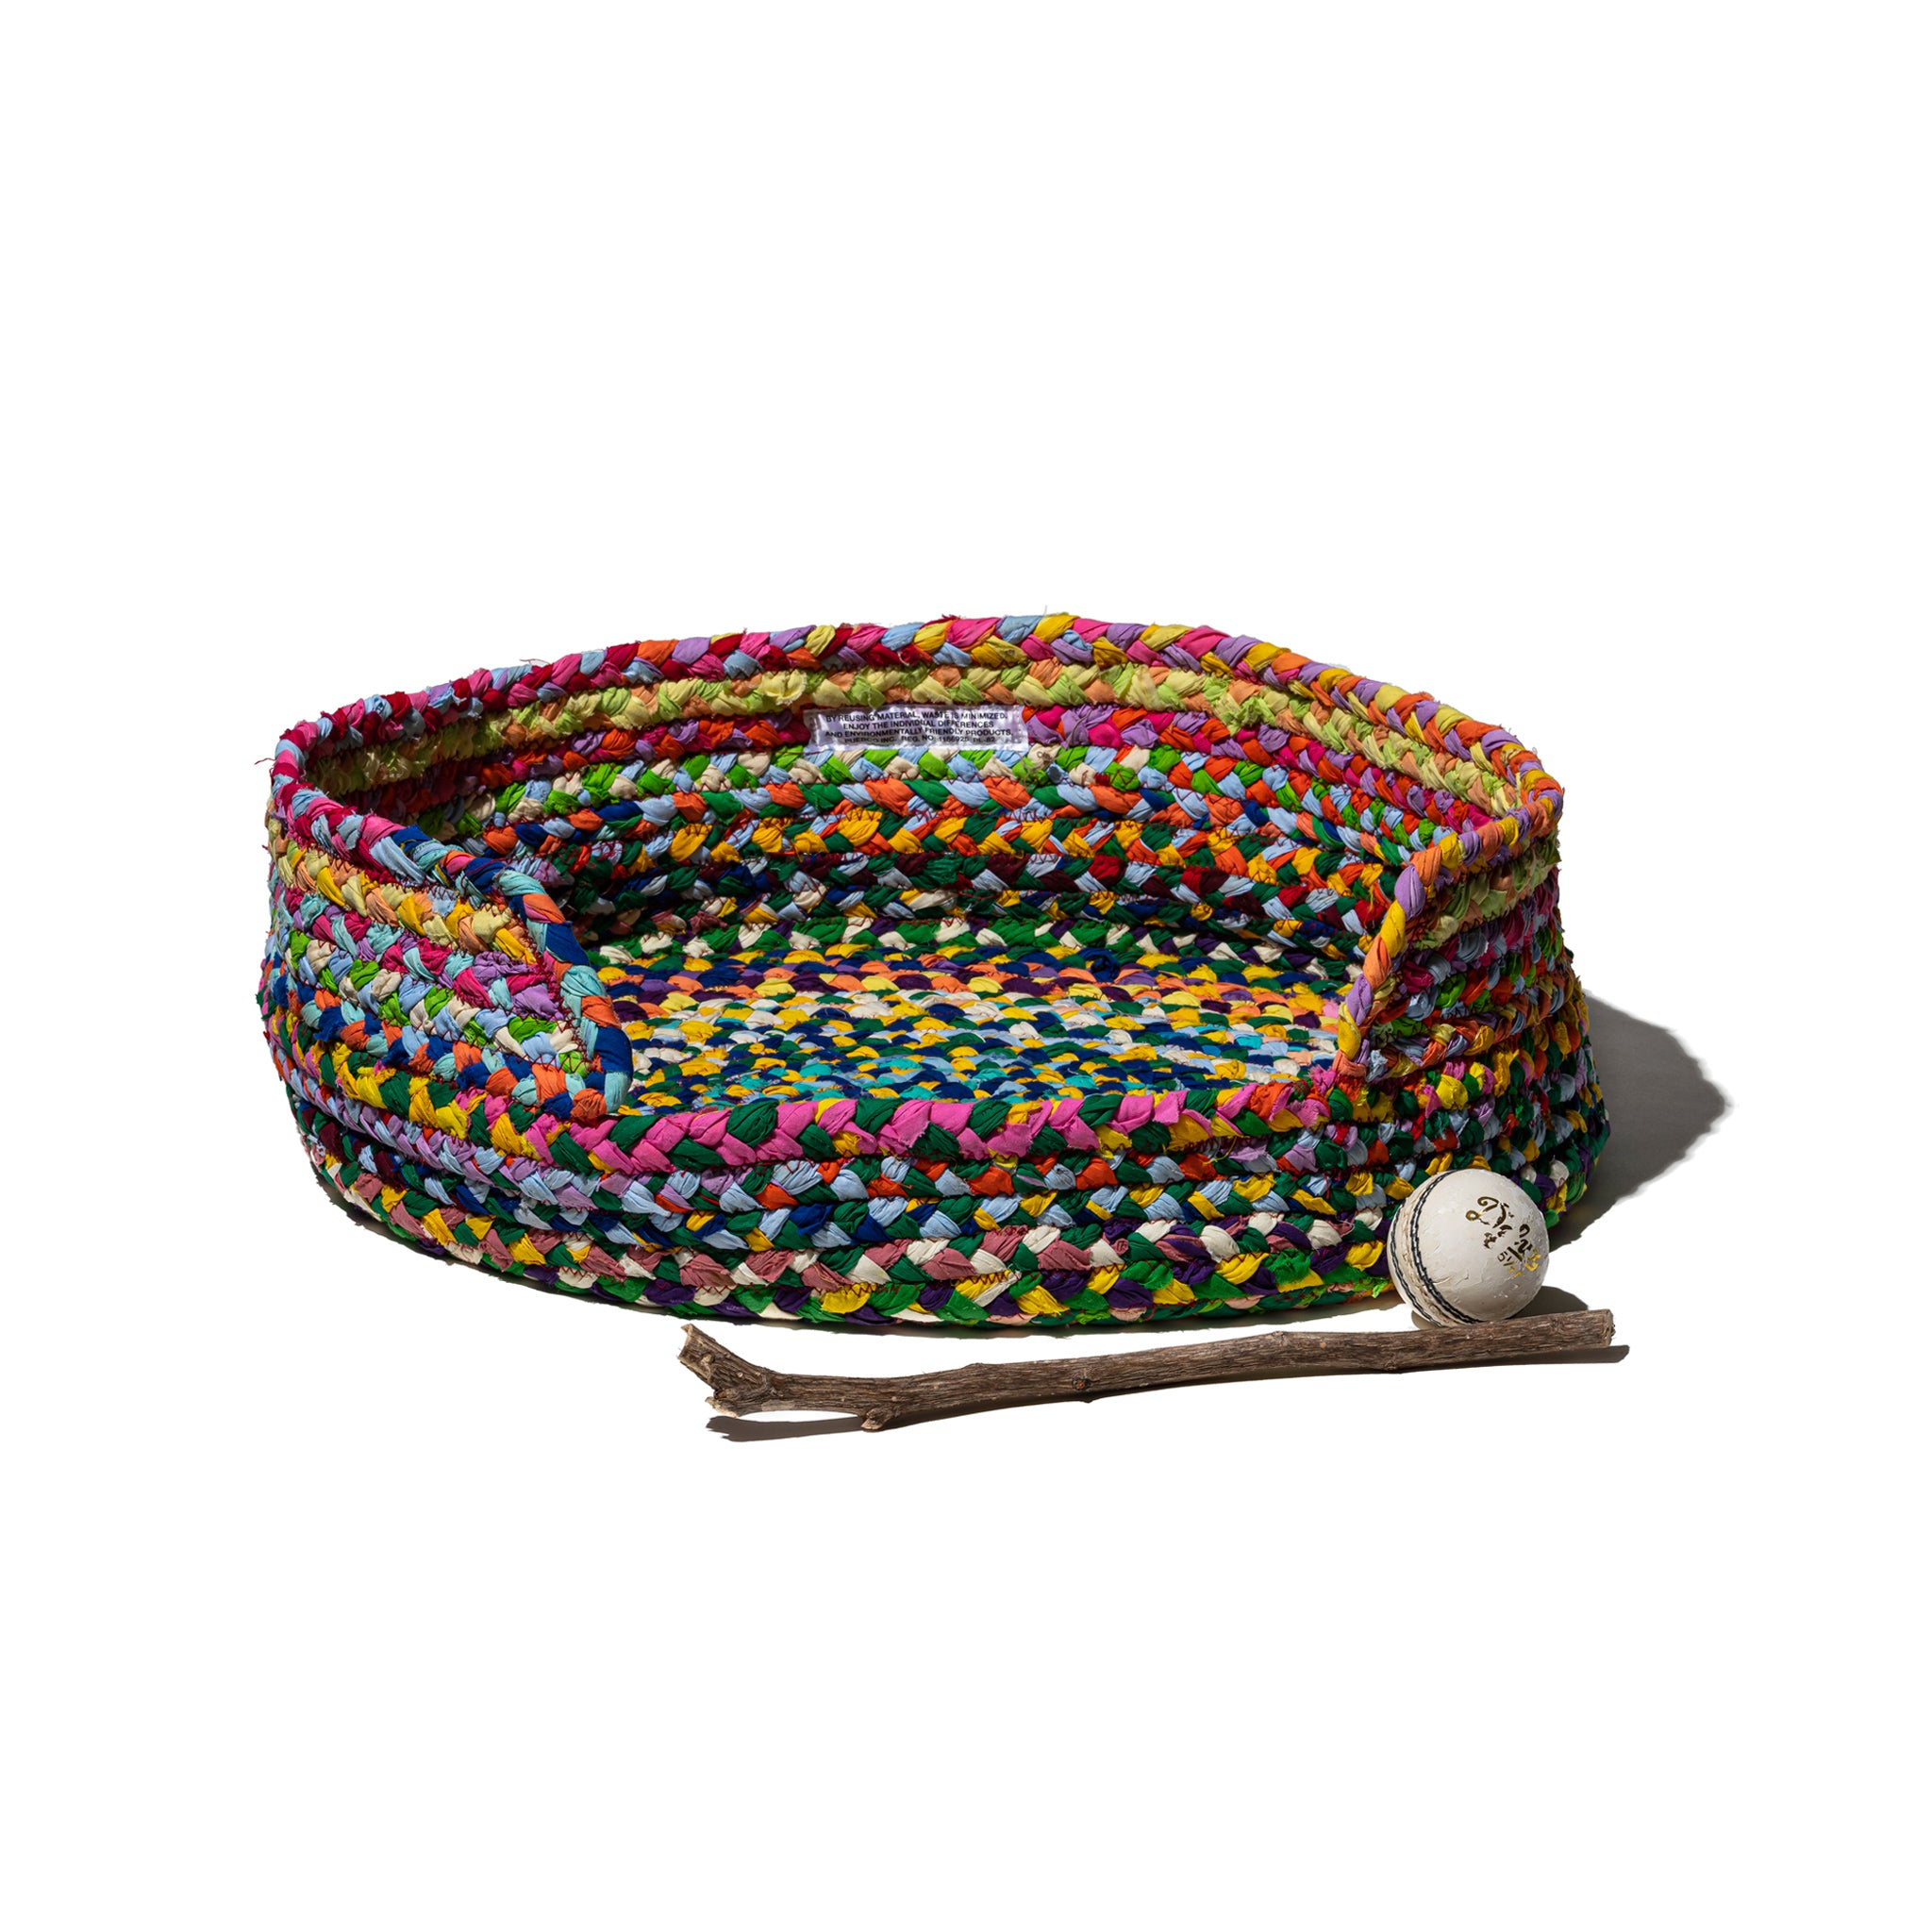 RECYCLED FABRIC BRAIDED PET BED – PUEBCO ONLINE STORE